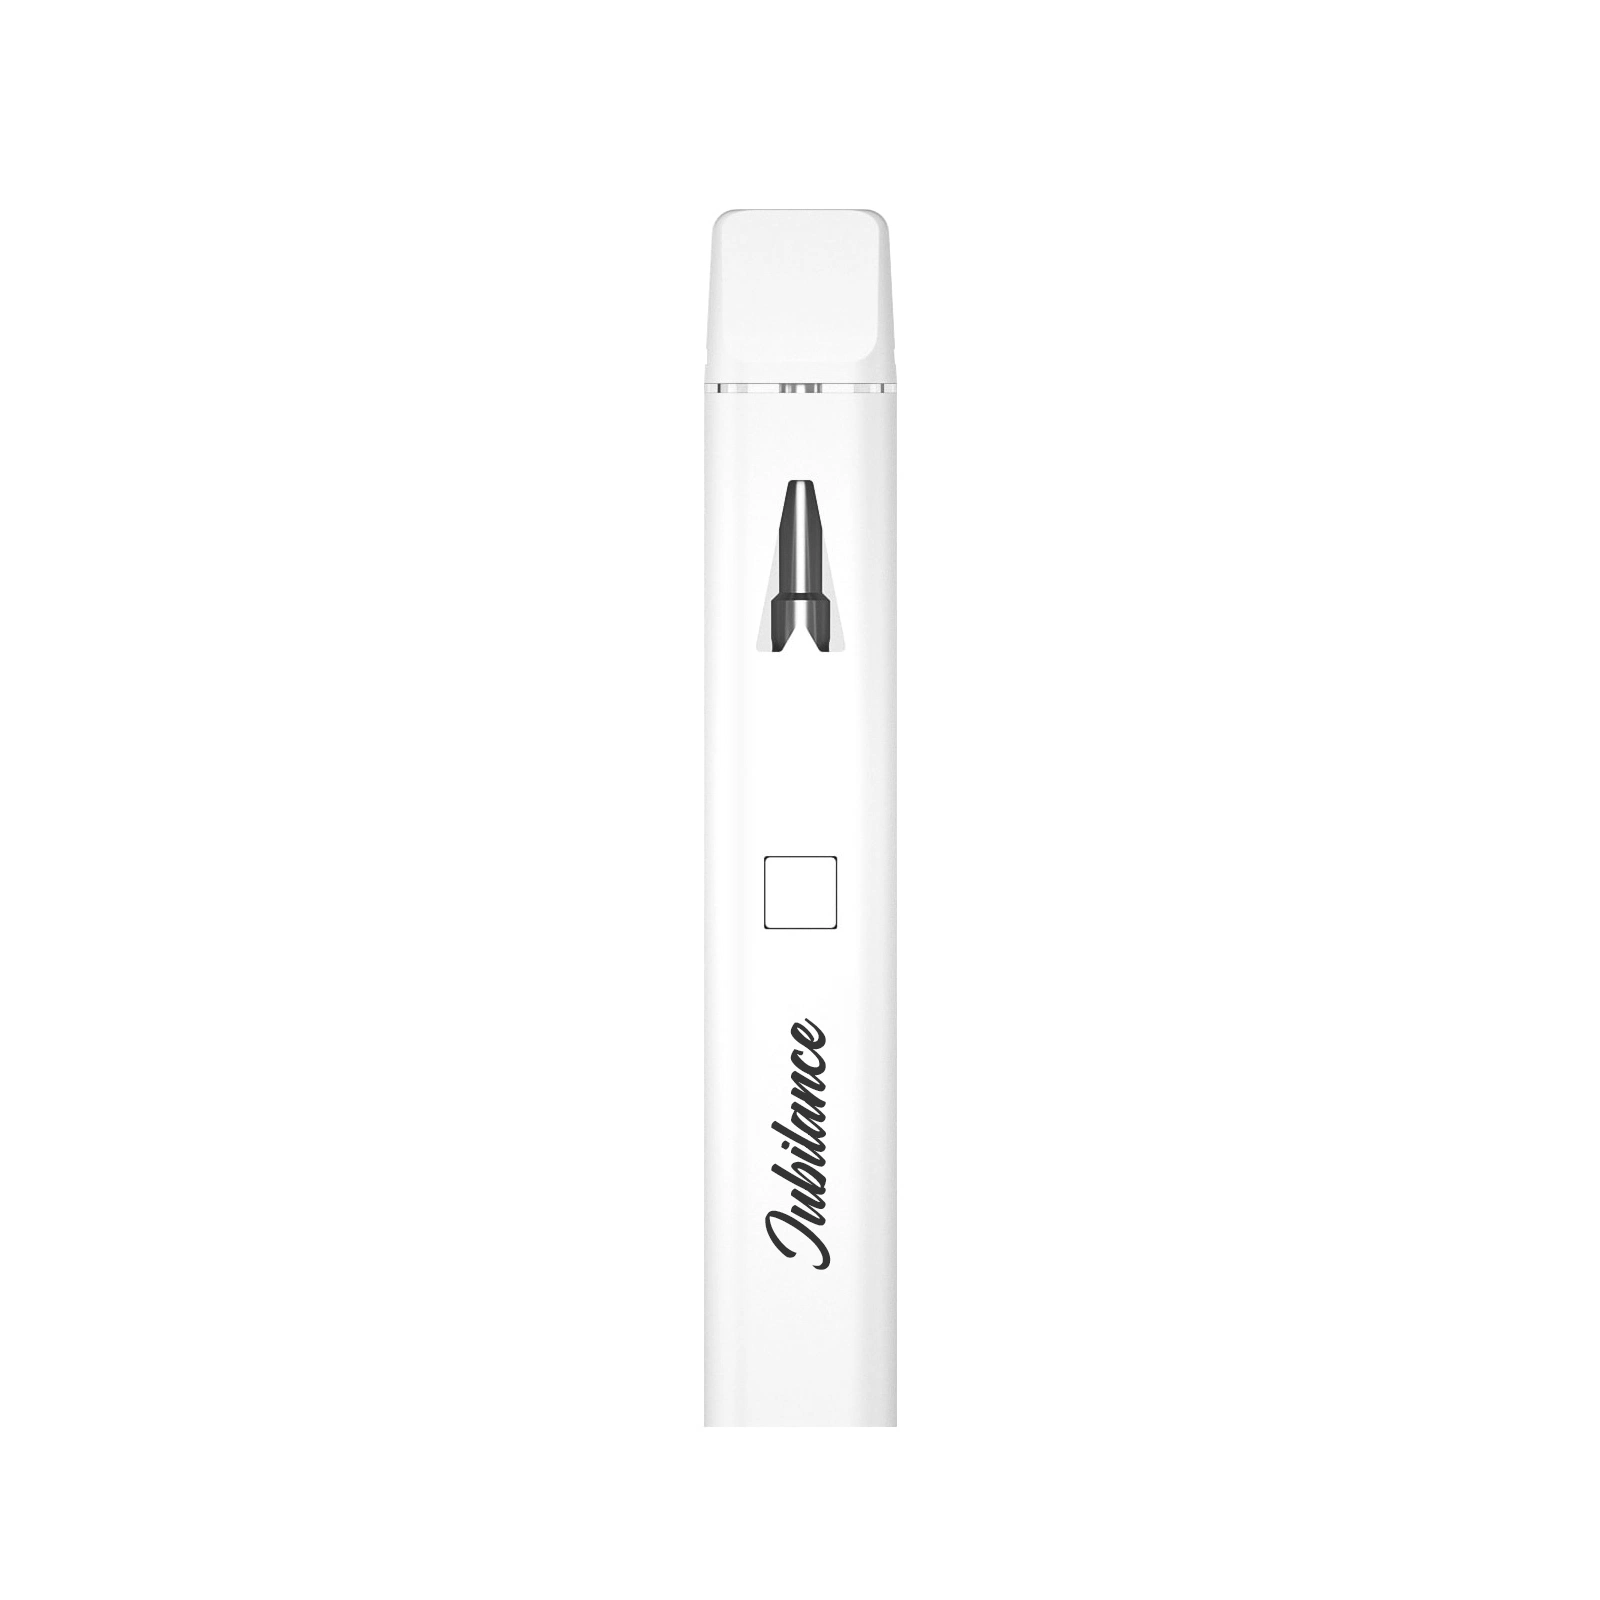 Jubilance Vaper Disposable/Chargeable Disposable/Chargeable Oil Cartridges Pen Battery 510 Thread